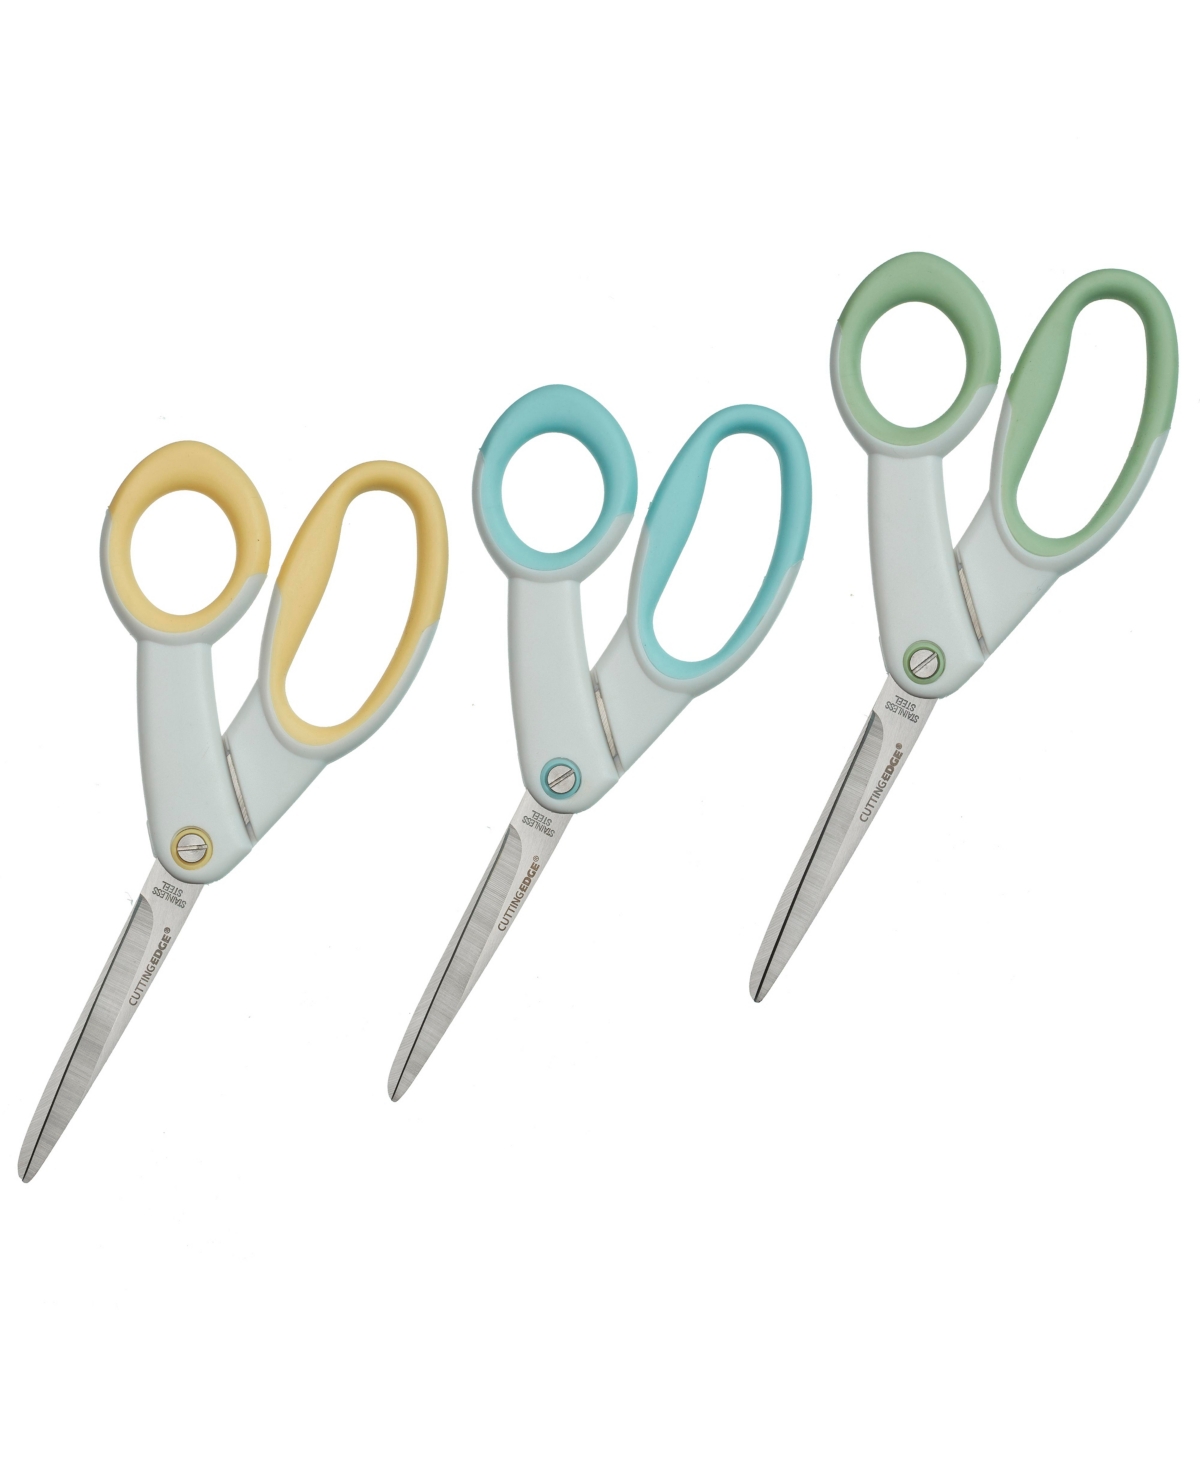 Ultra-Grip 8.5in Stainless Steel Scissor 3-Pack- Assorted (Case Pack) - Assorted